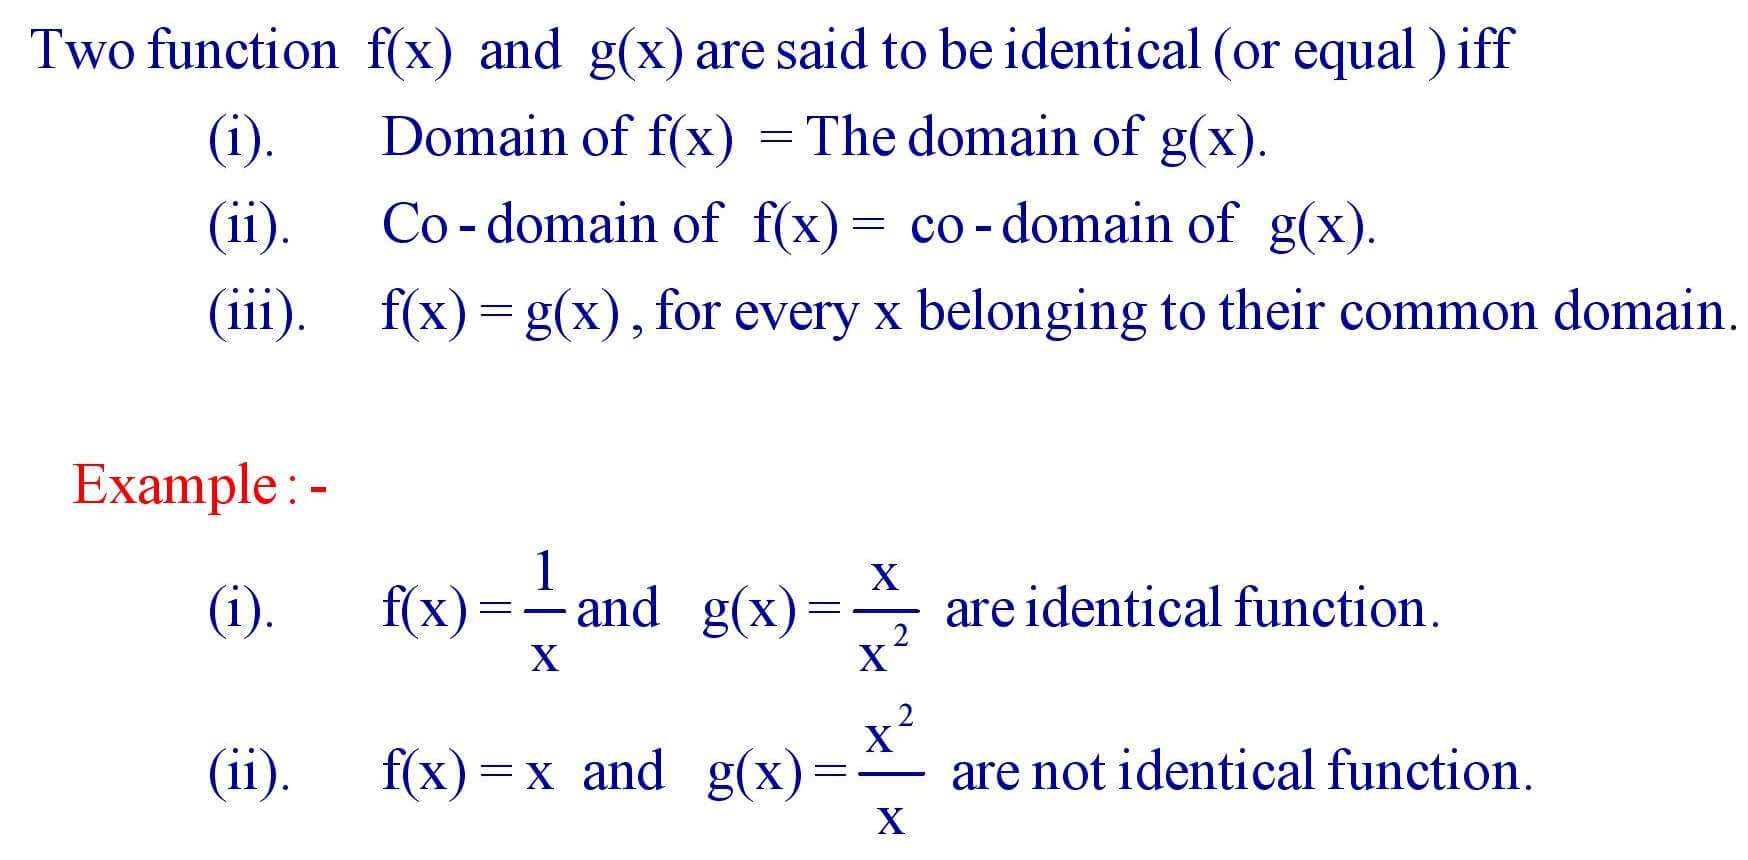 Equal or Identical Function